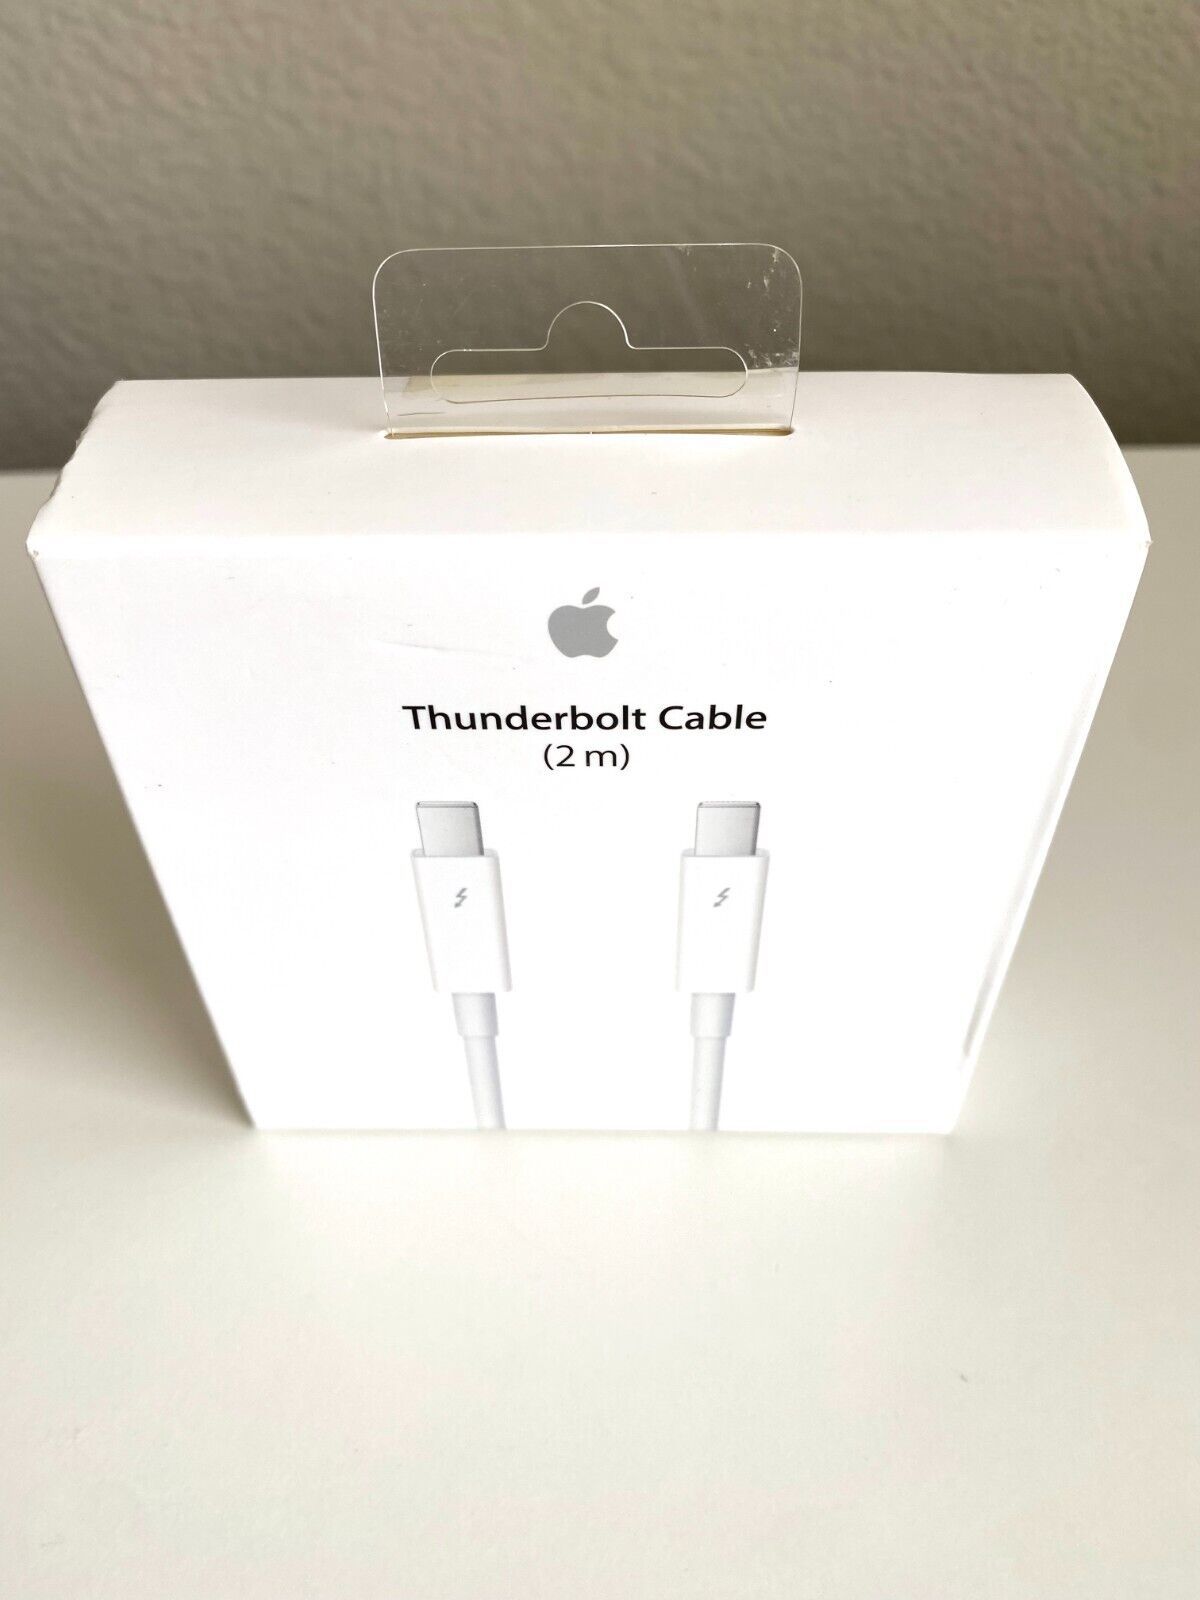 NEW SEALED Apple 2m / 6FT Thunderbolt Cable Mini DP, White - A1410, MD861LL/A